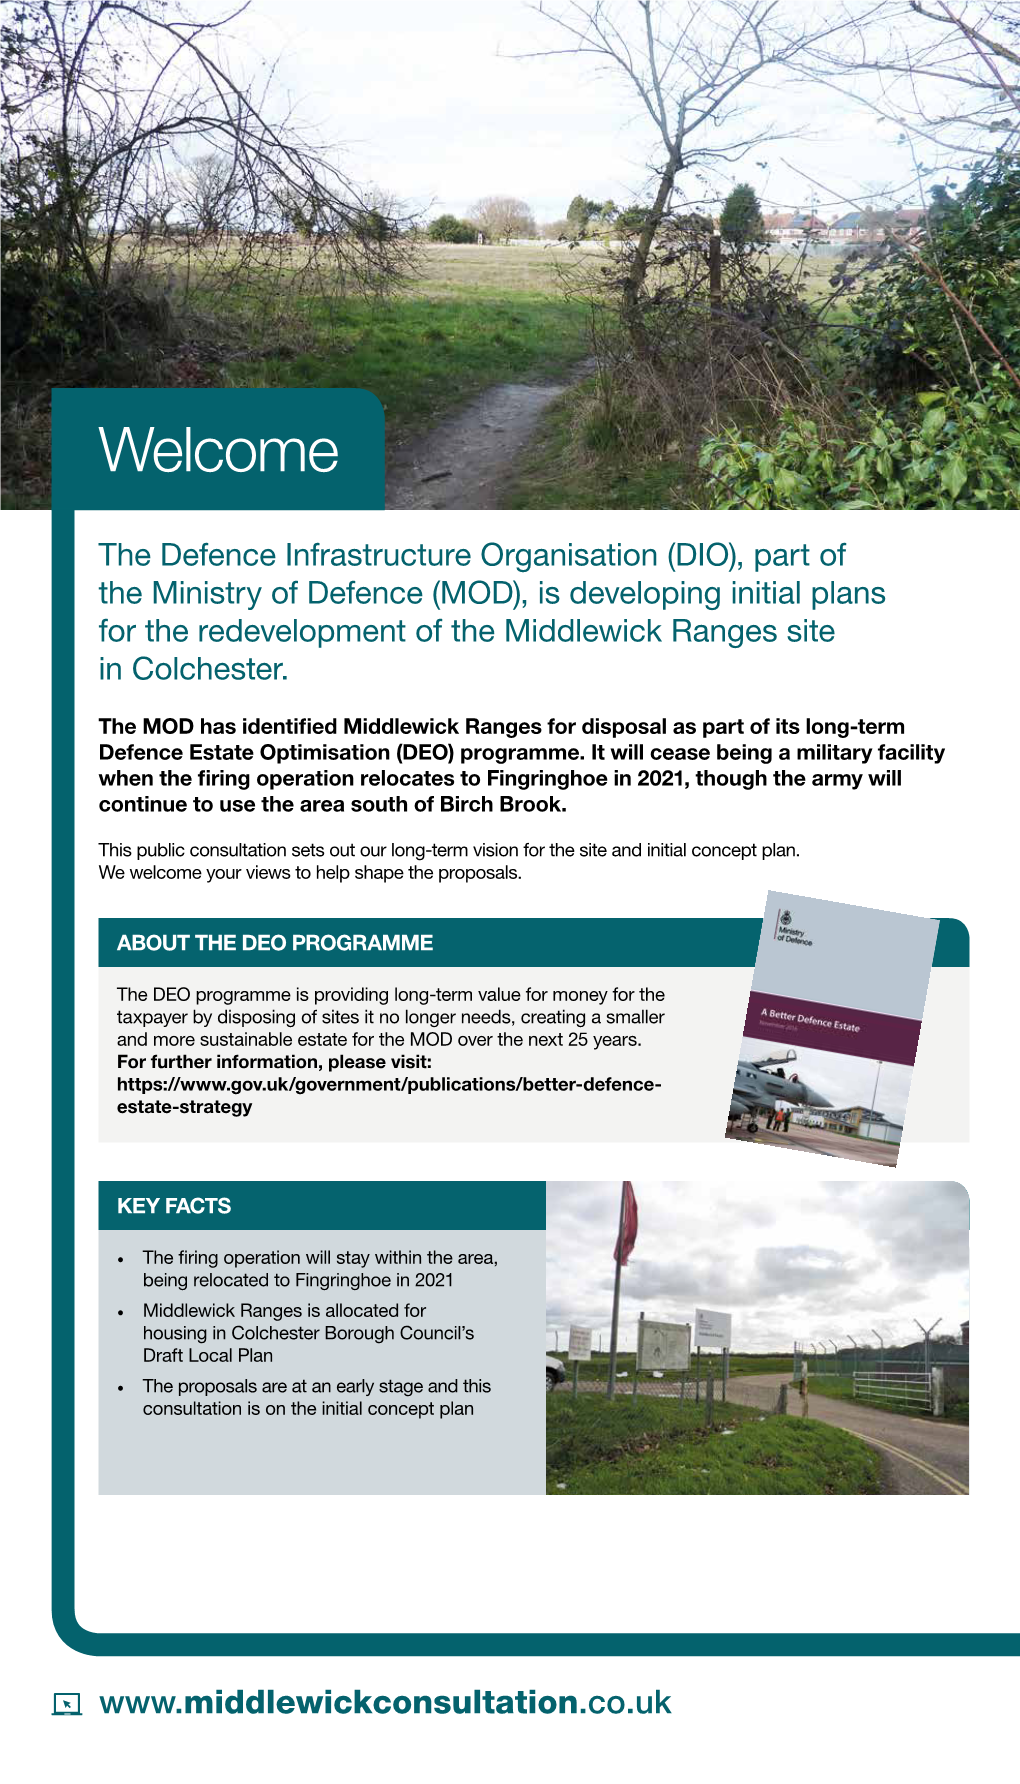 Middlewick Ranges: Supporting Sustainable Growth for Colchester